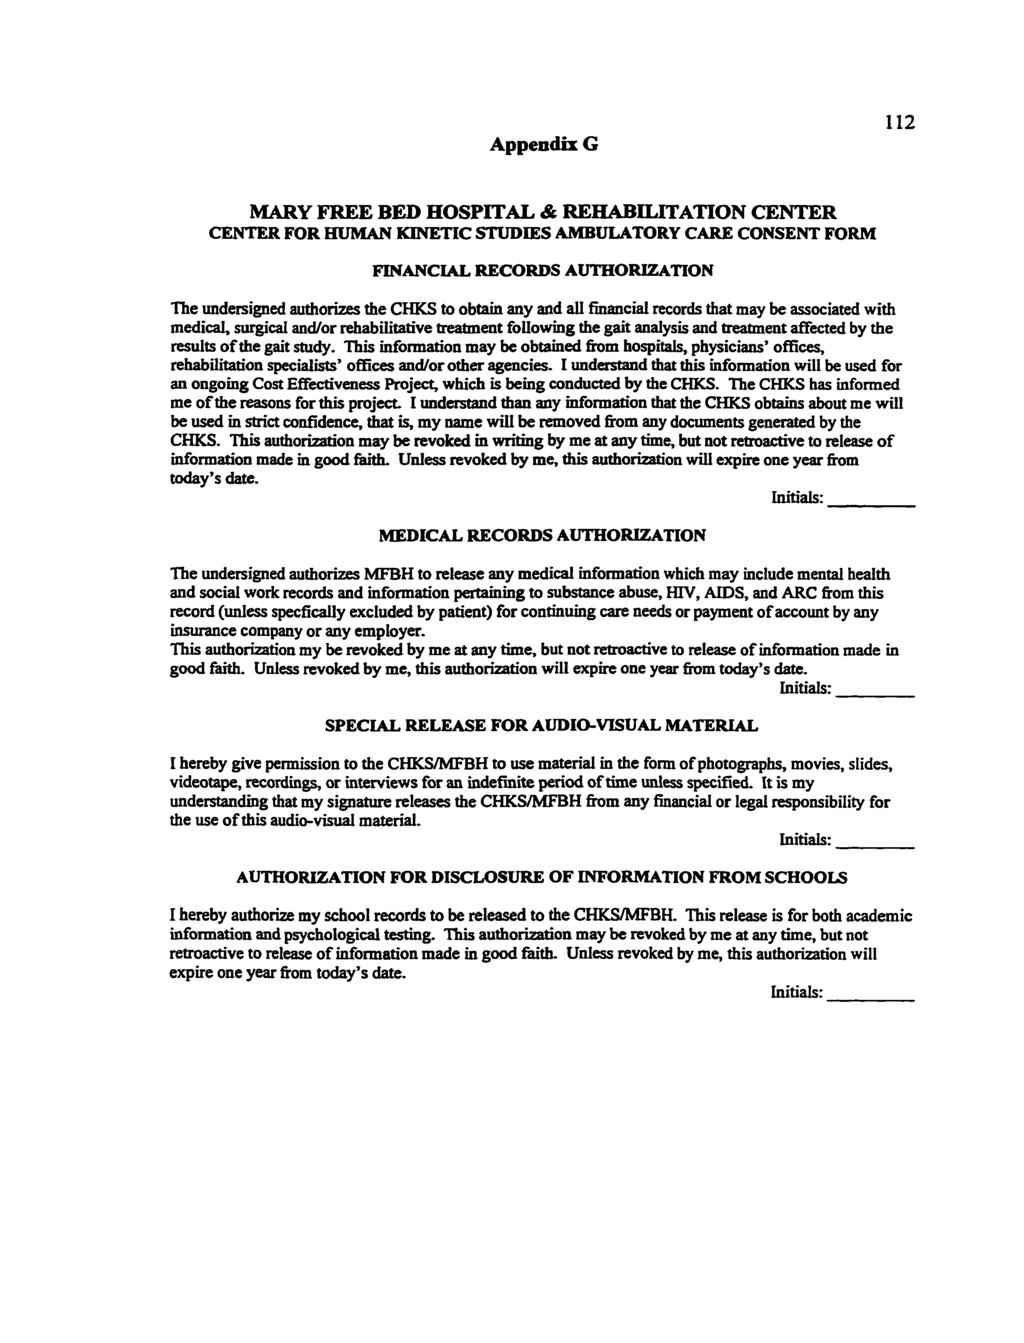 Appendix G 112 MARY FREE BED HOSPITAL & REHABILITATION CENTER CENTER FOR HUMAN ionetic STUDIES AMBULATORY CARE CONSENT FORM FINANCIAL RECORDS AUTHORIZATION The undersigned authorizes the CHKS to